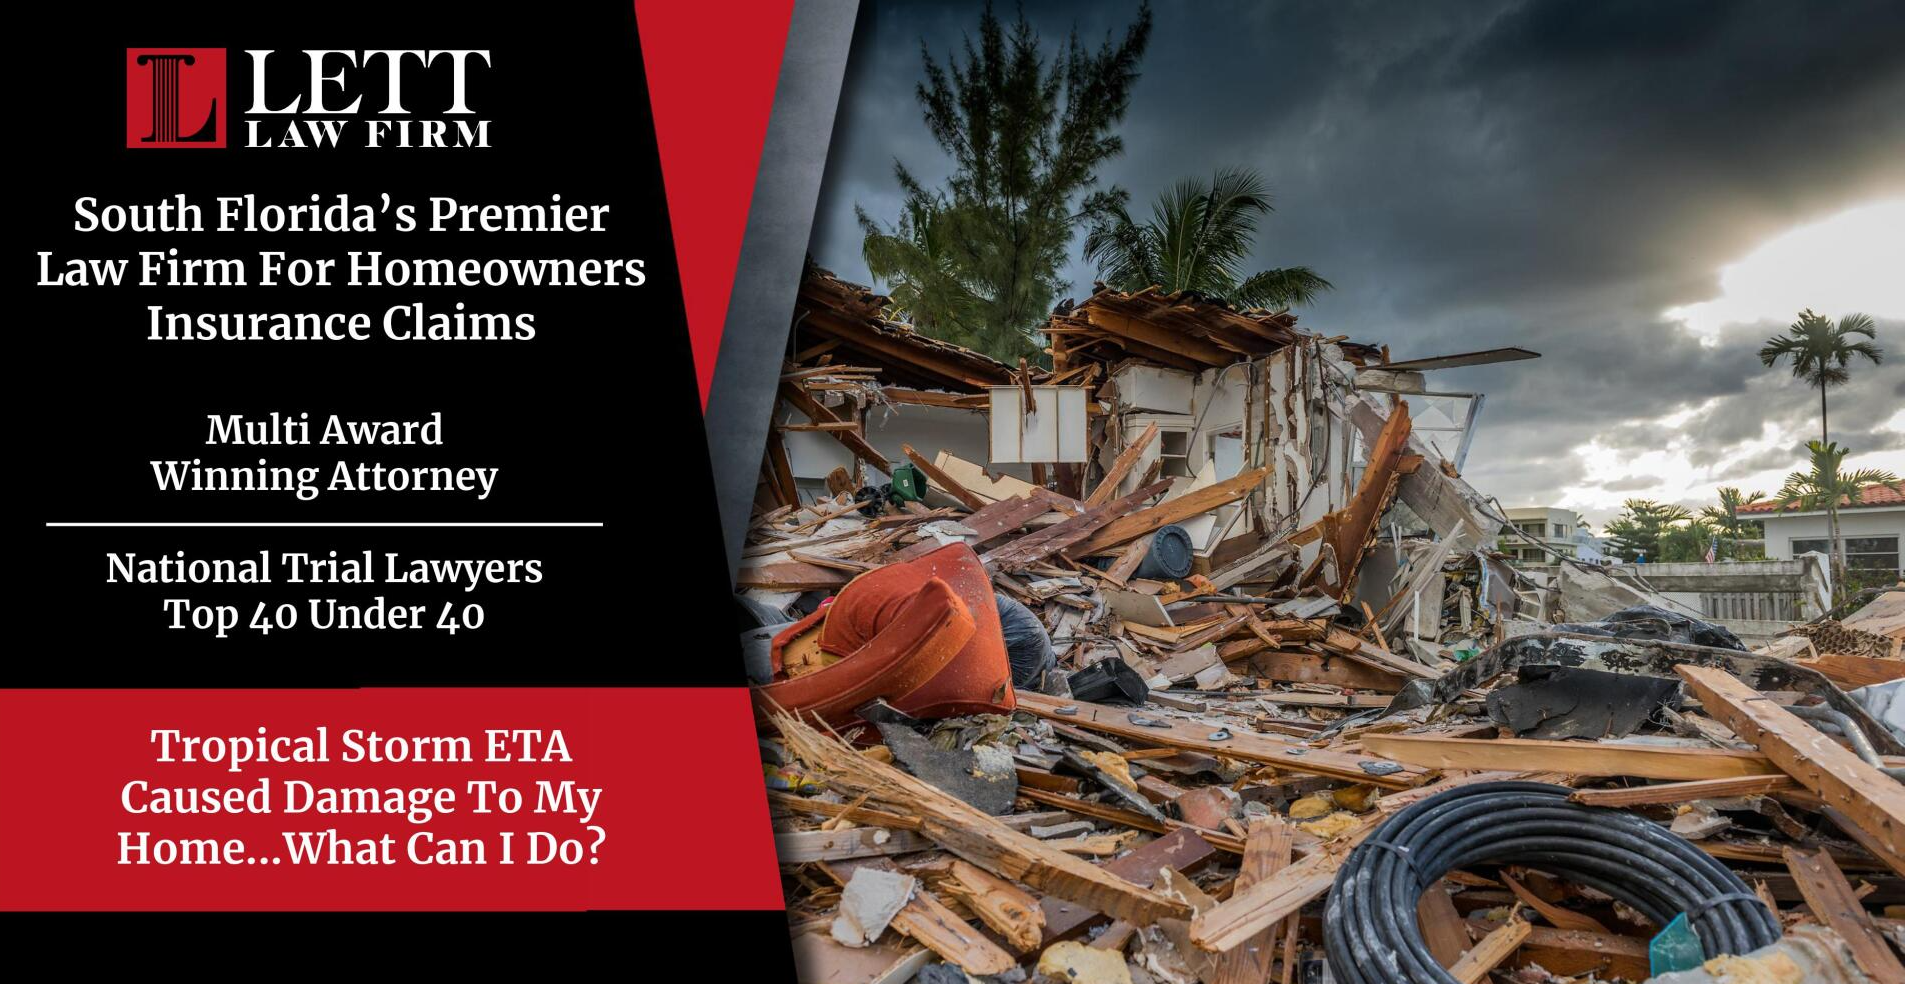 Miami Homeowners Insurance Lawyer - Tropical Storm ETA Caused Damage To My Home...What Can I Do?